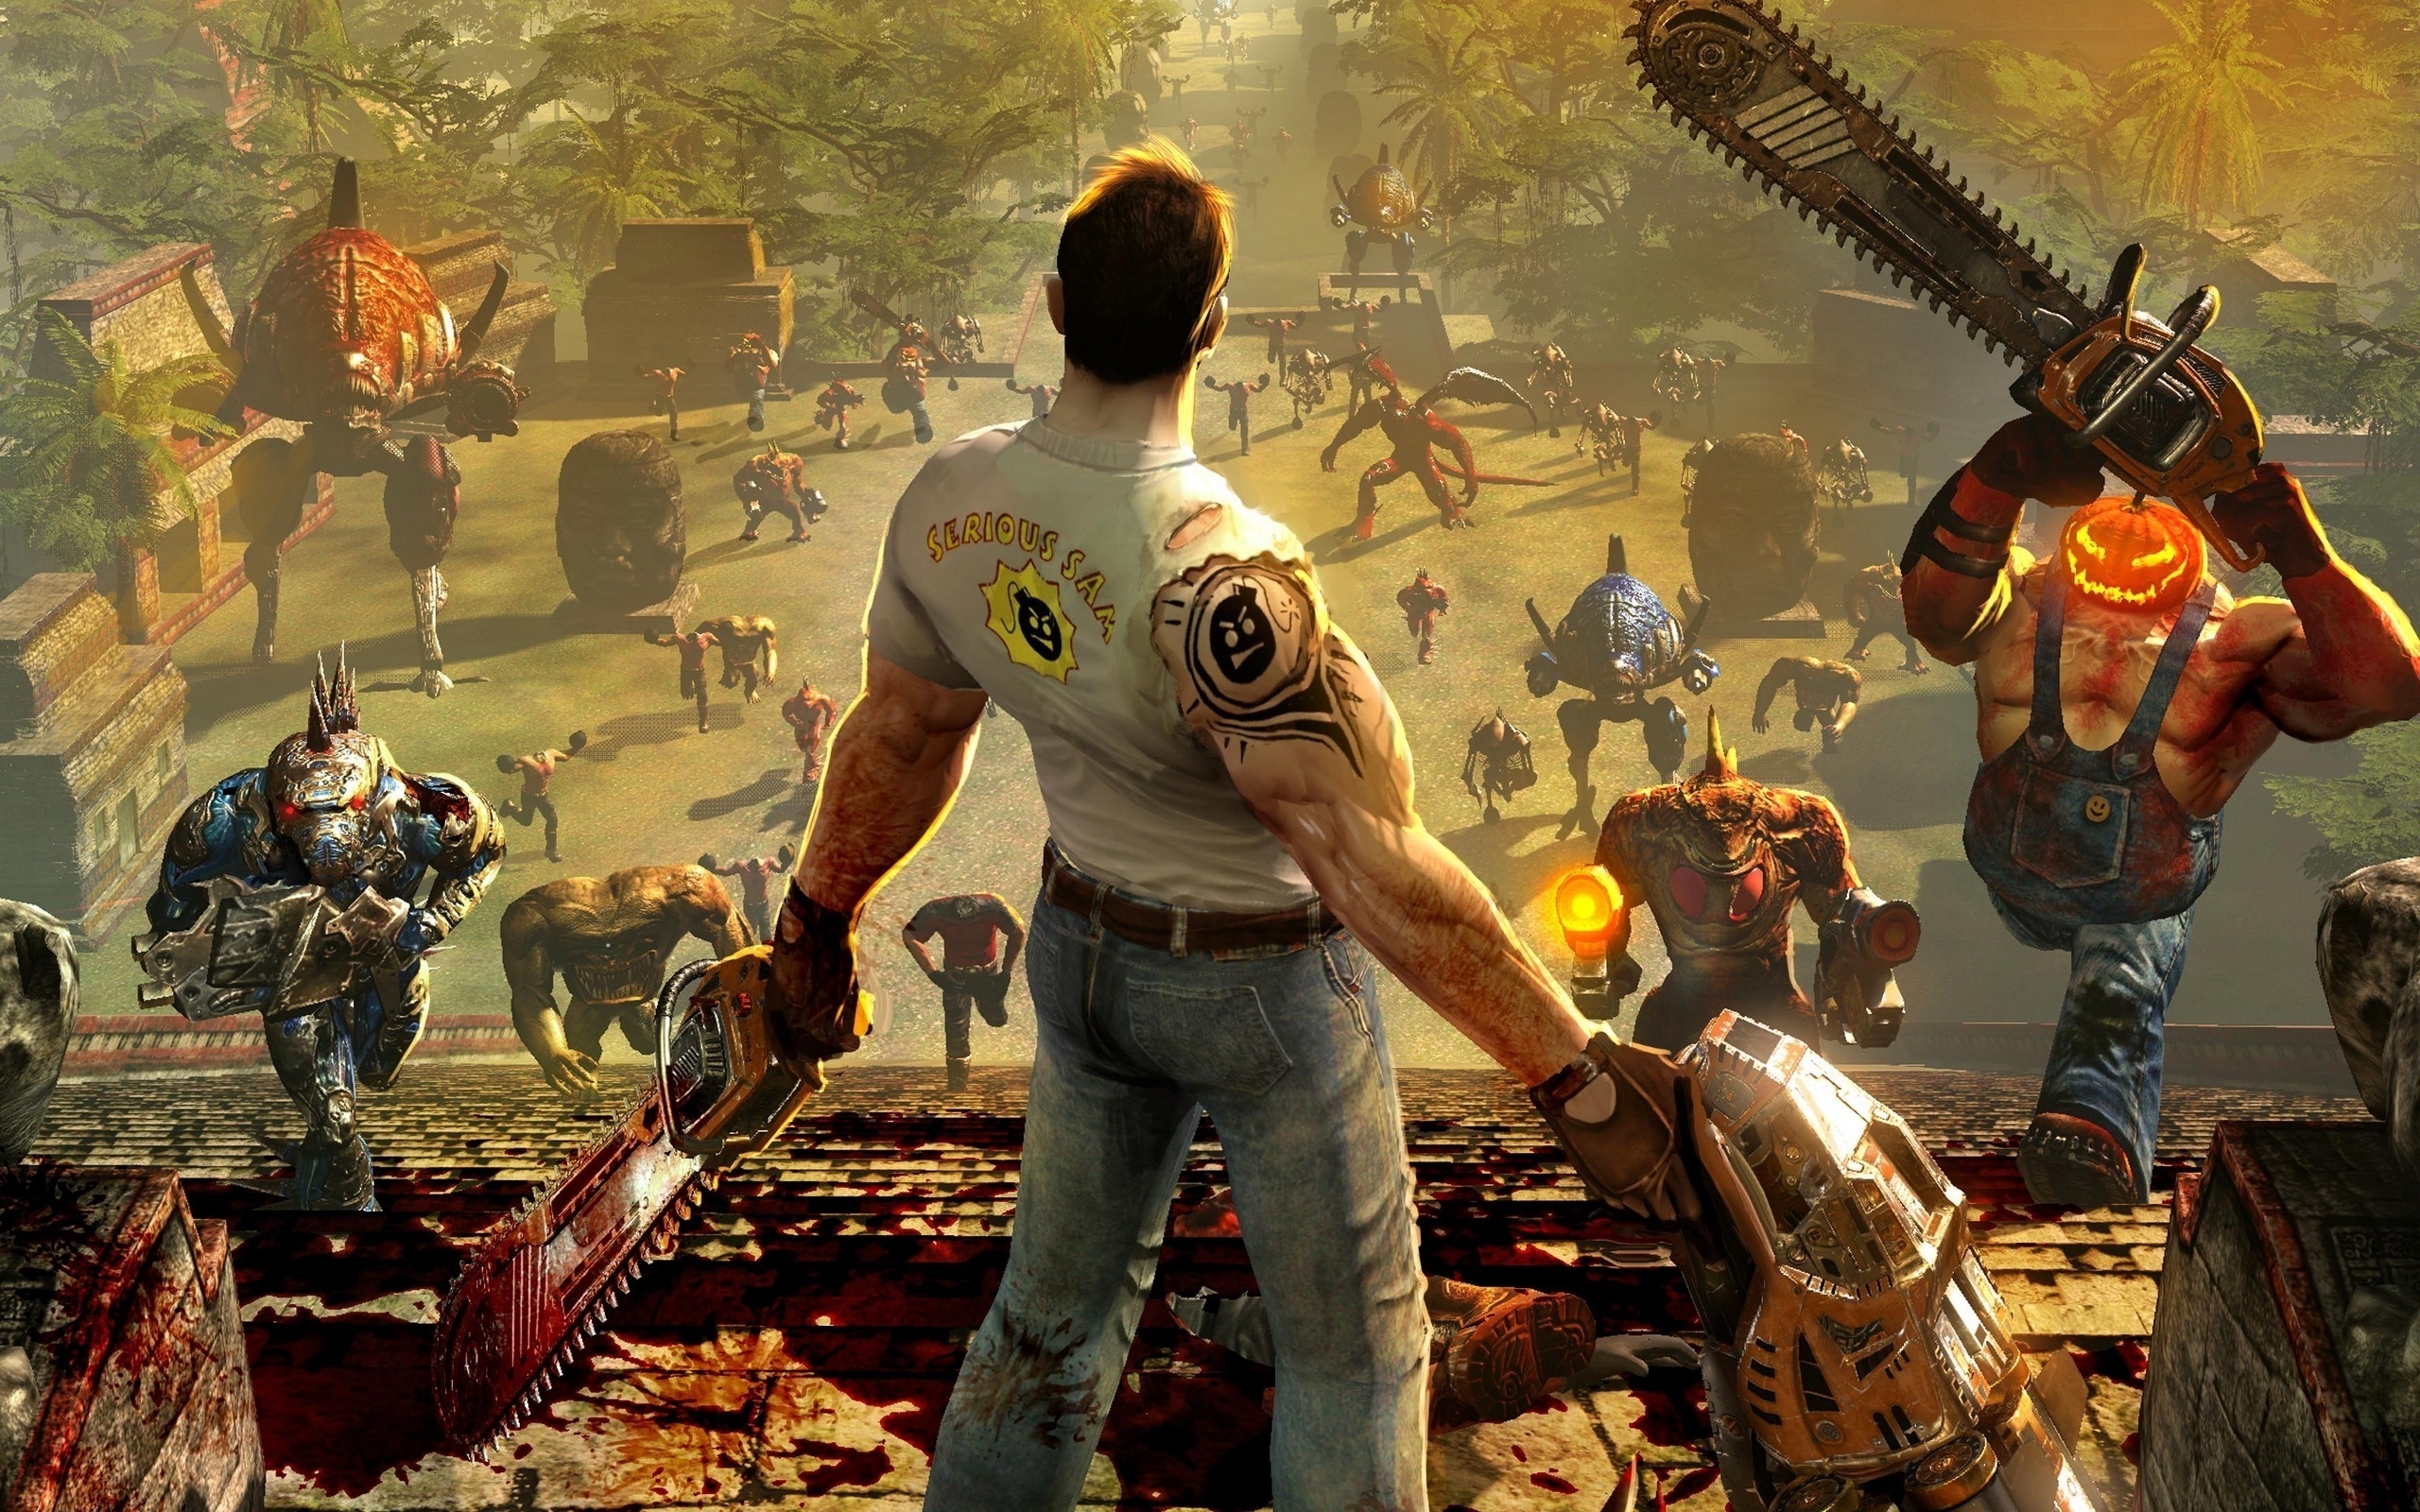 HQ Serious Sam Wallpapers | File 2394.28Kb